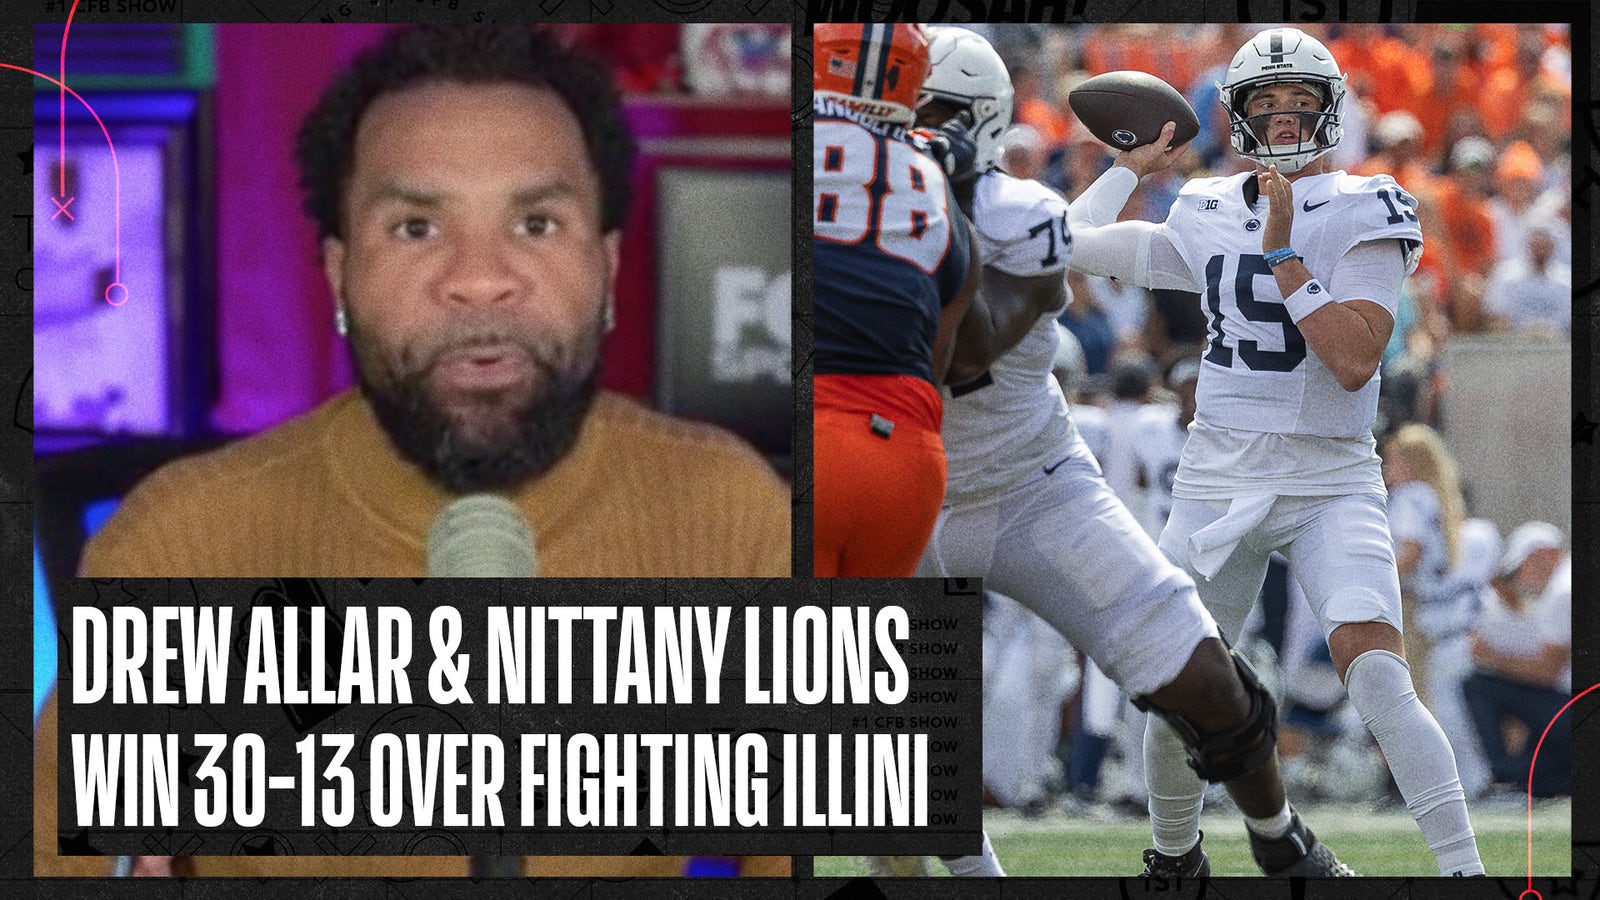 Breaking down Penn State's win over Illinois